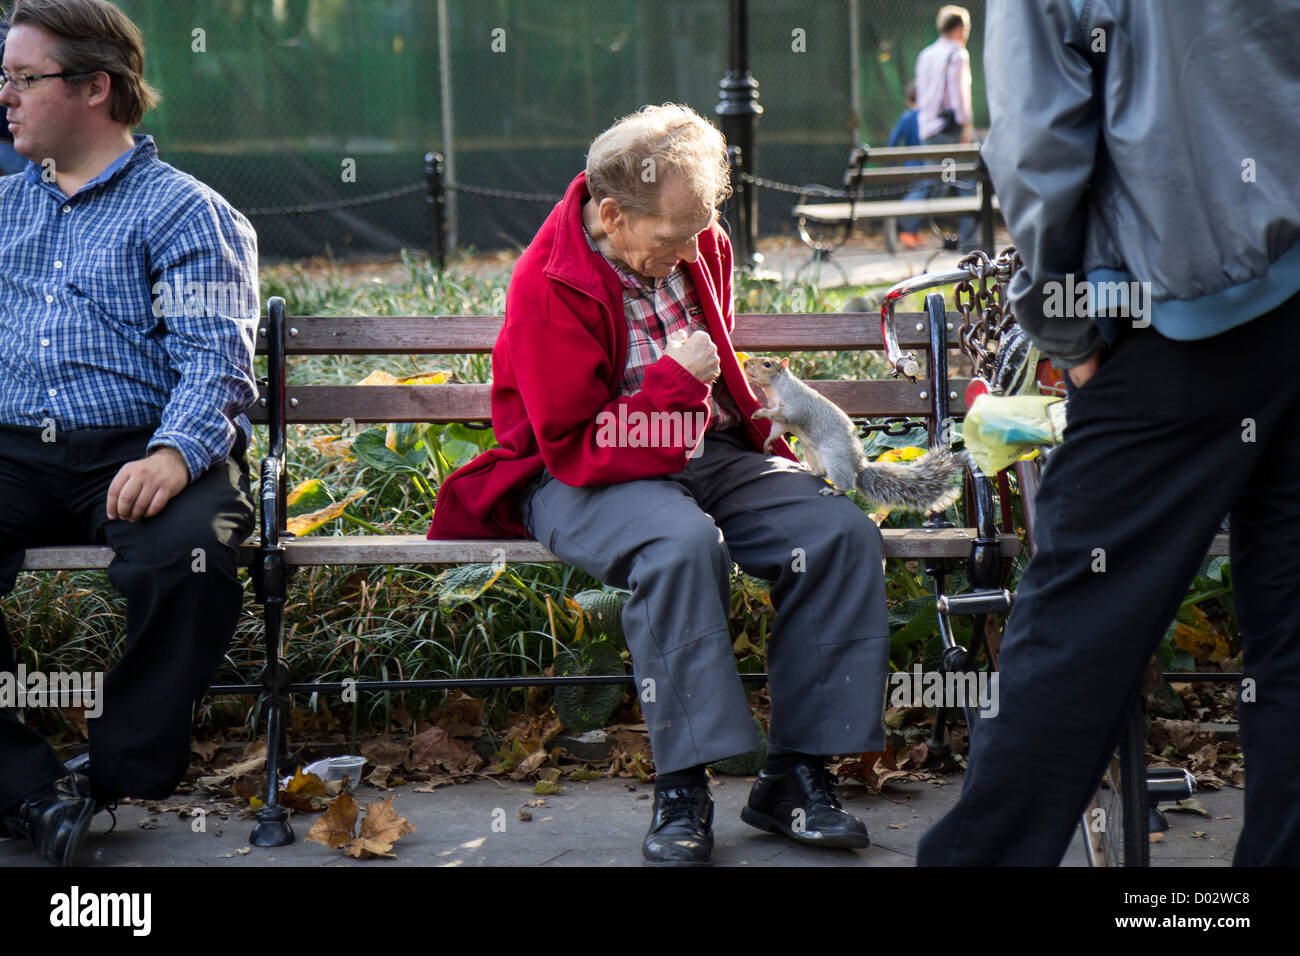 Man feeding a gray squirrel on a bench in Union Square Park New York Stock Photo